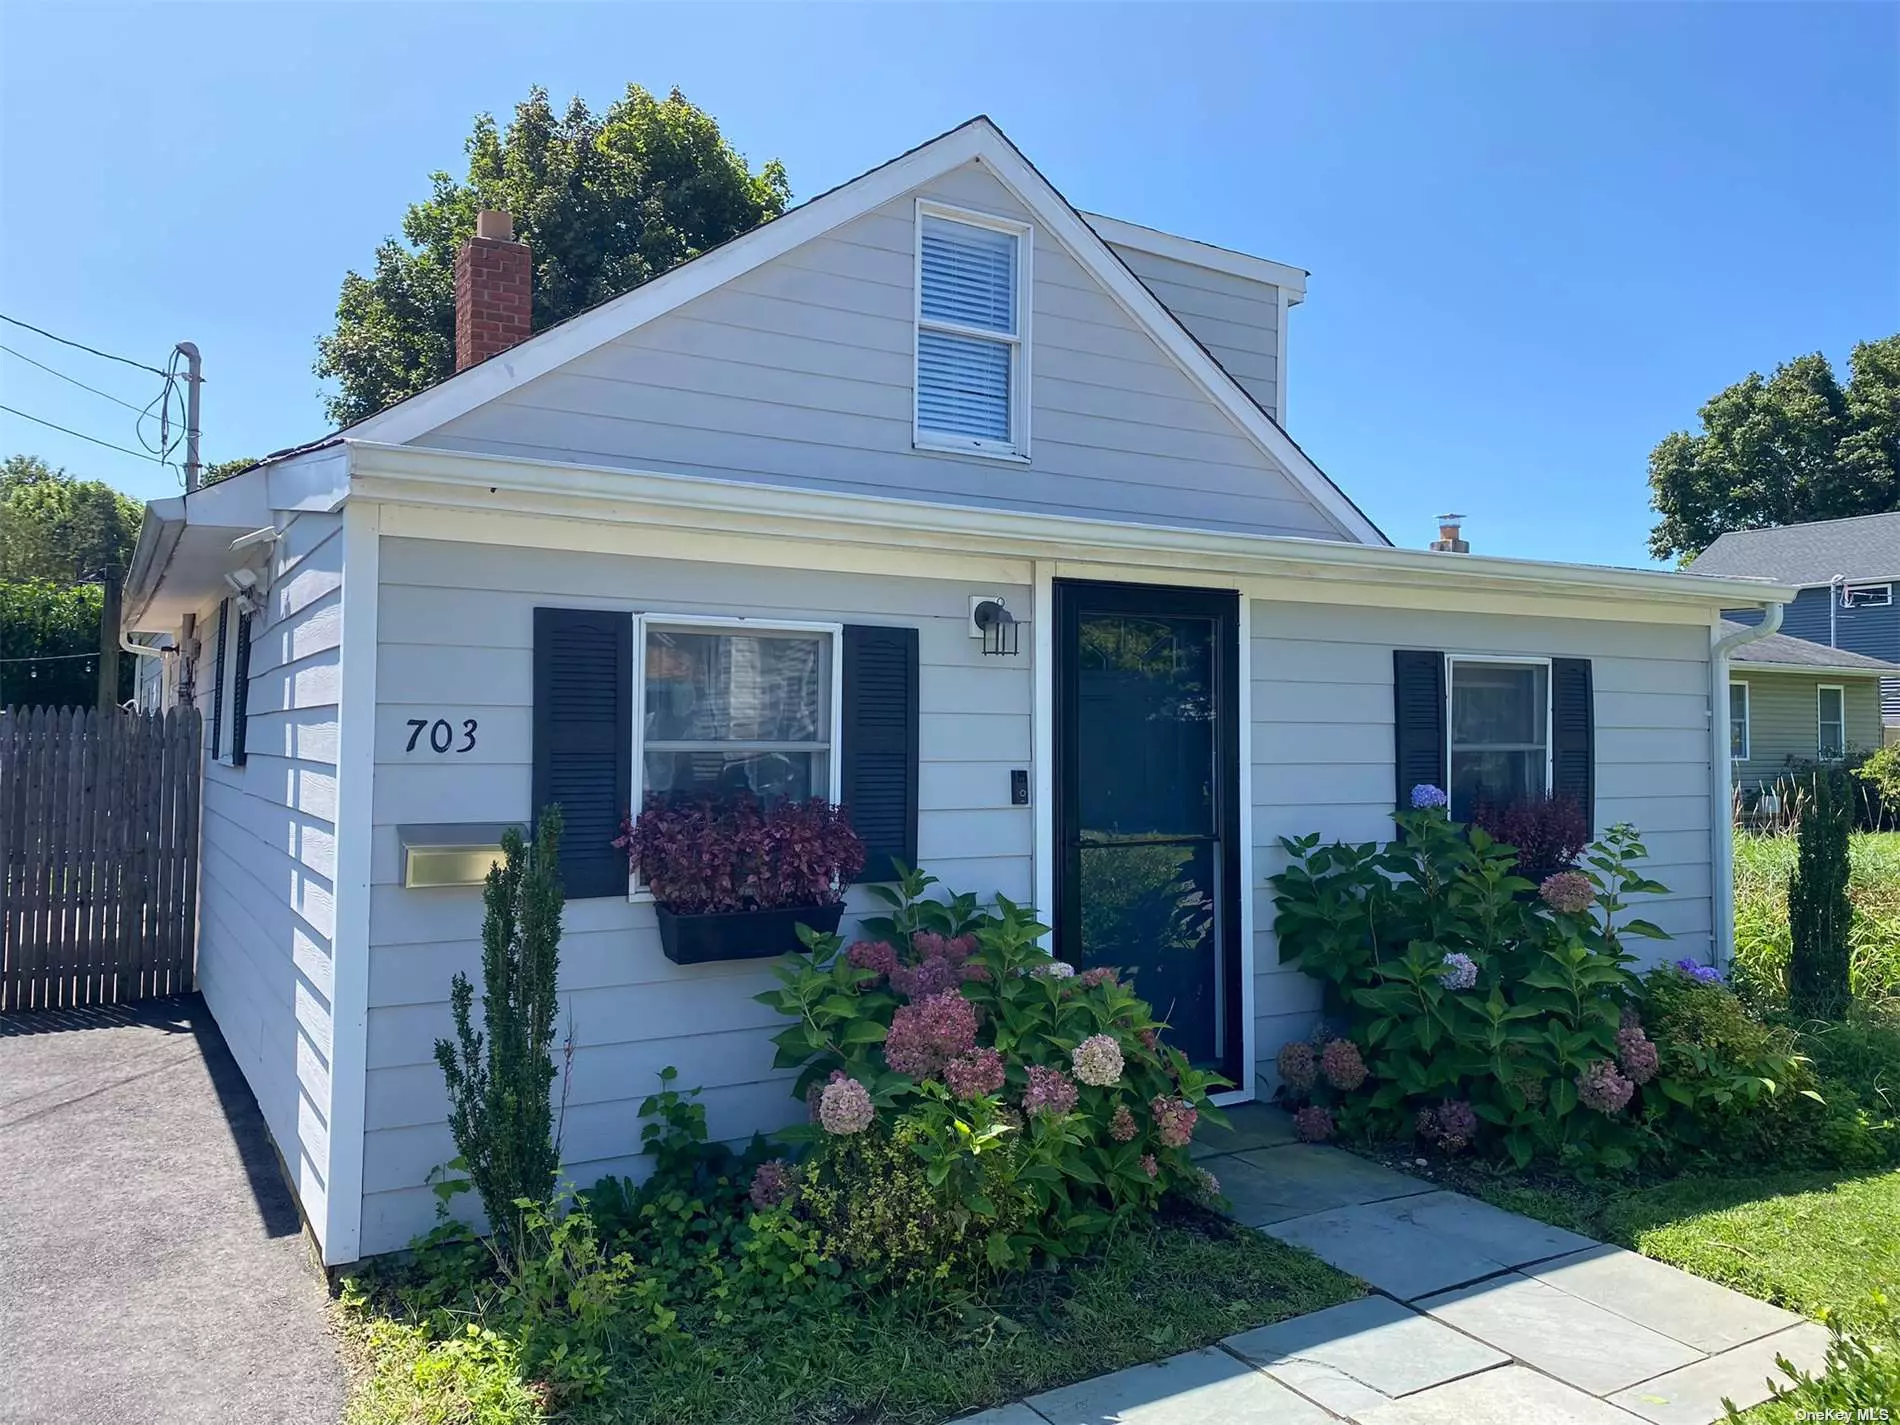 Year Round Rental near all that Greenport has to offer. Walking Distance to Peconic Bay and 6th St Beach, Greenport Village Shops, Restaurants, the LIRR & Shelter Isl Ferry.  Must See!